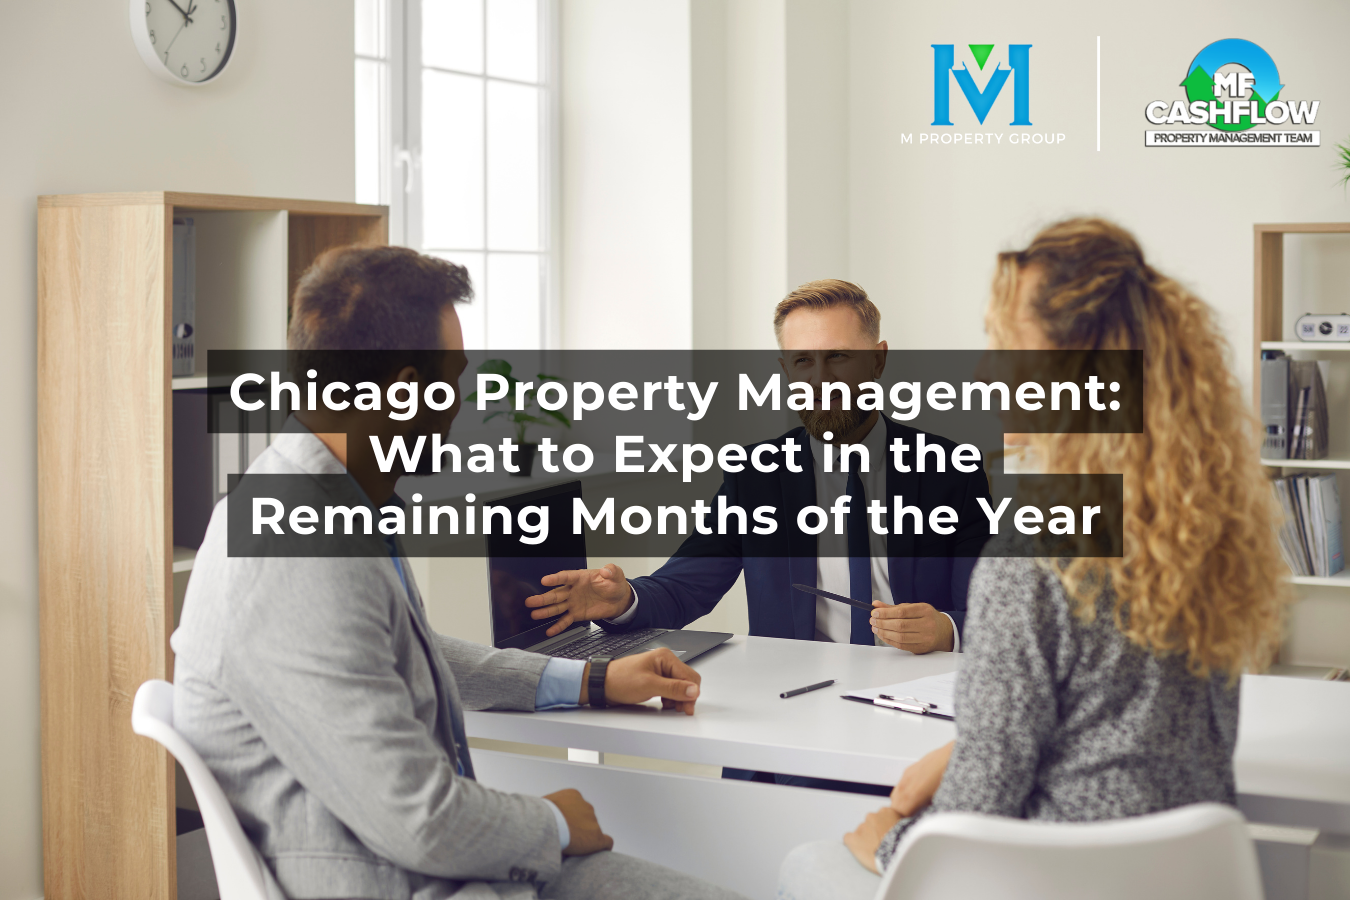 Chicago Property Management: What to Expect in the Remaining Months of the Year